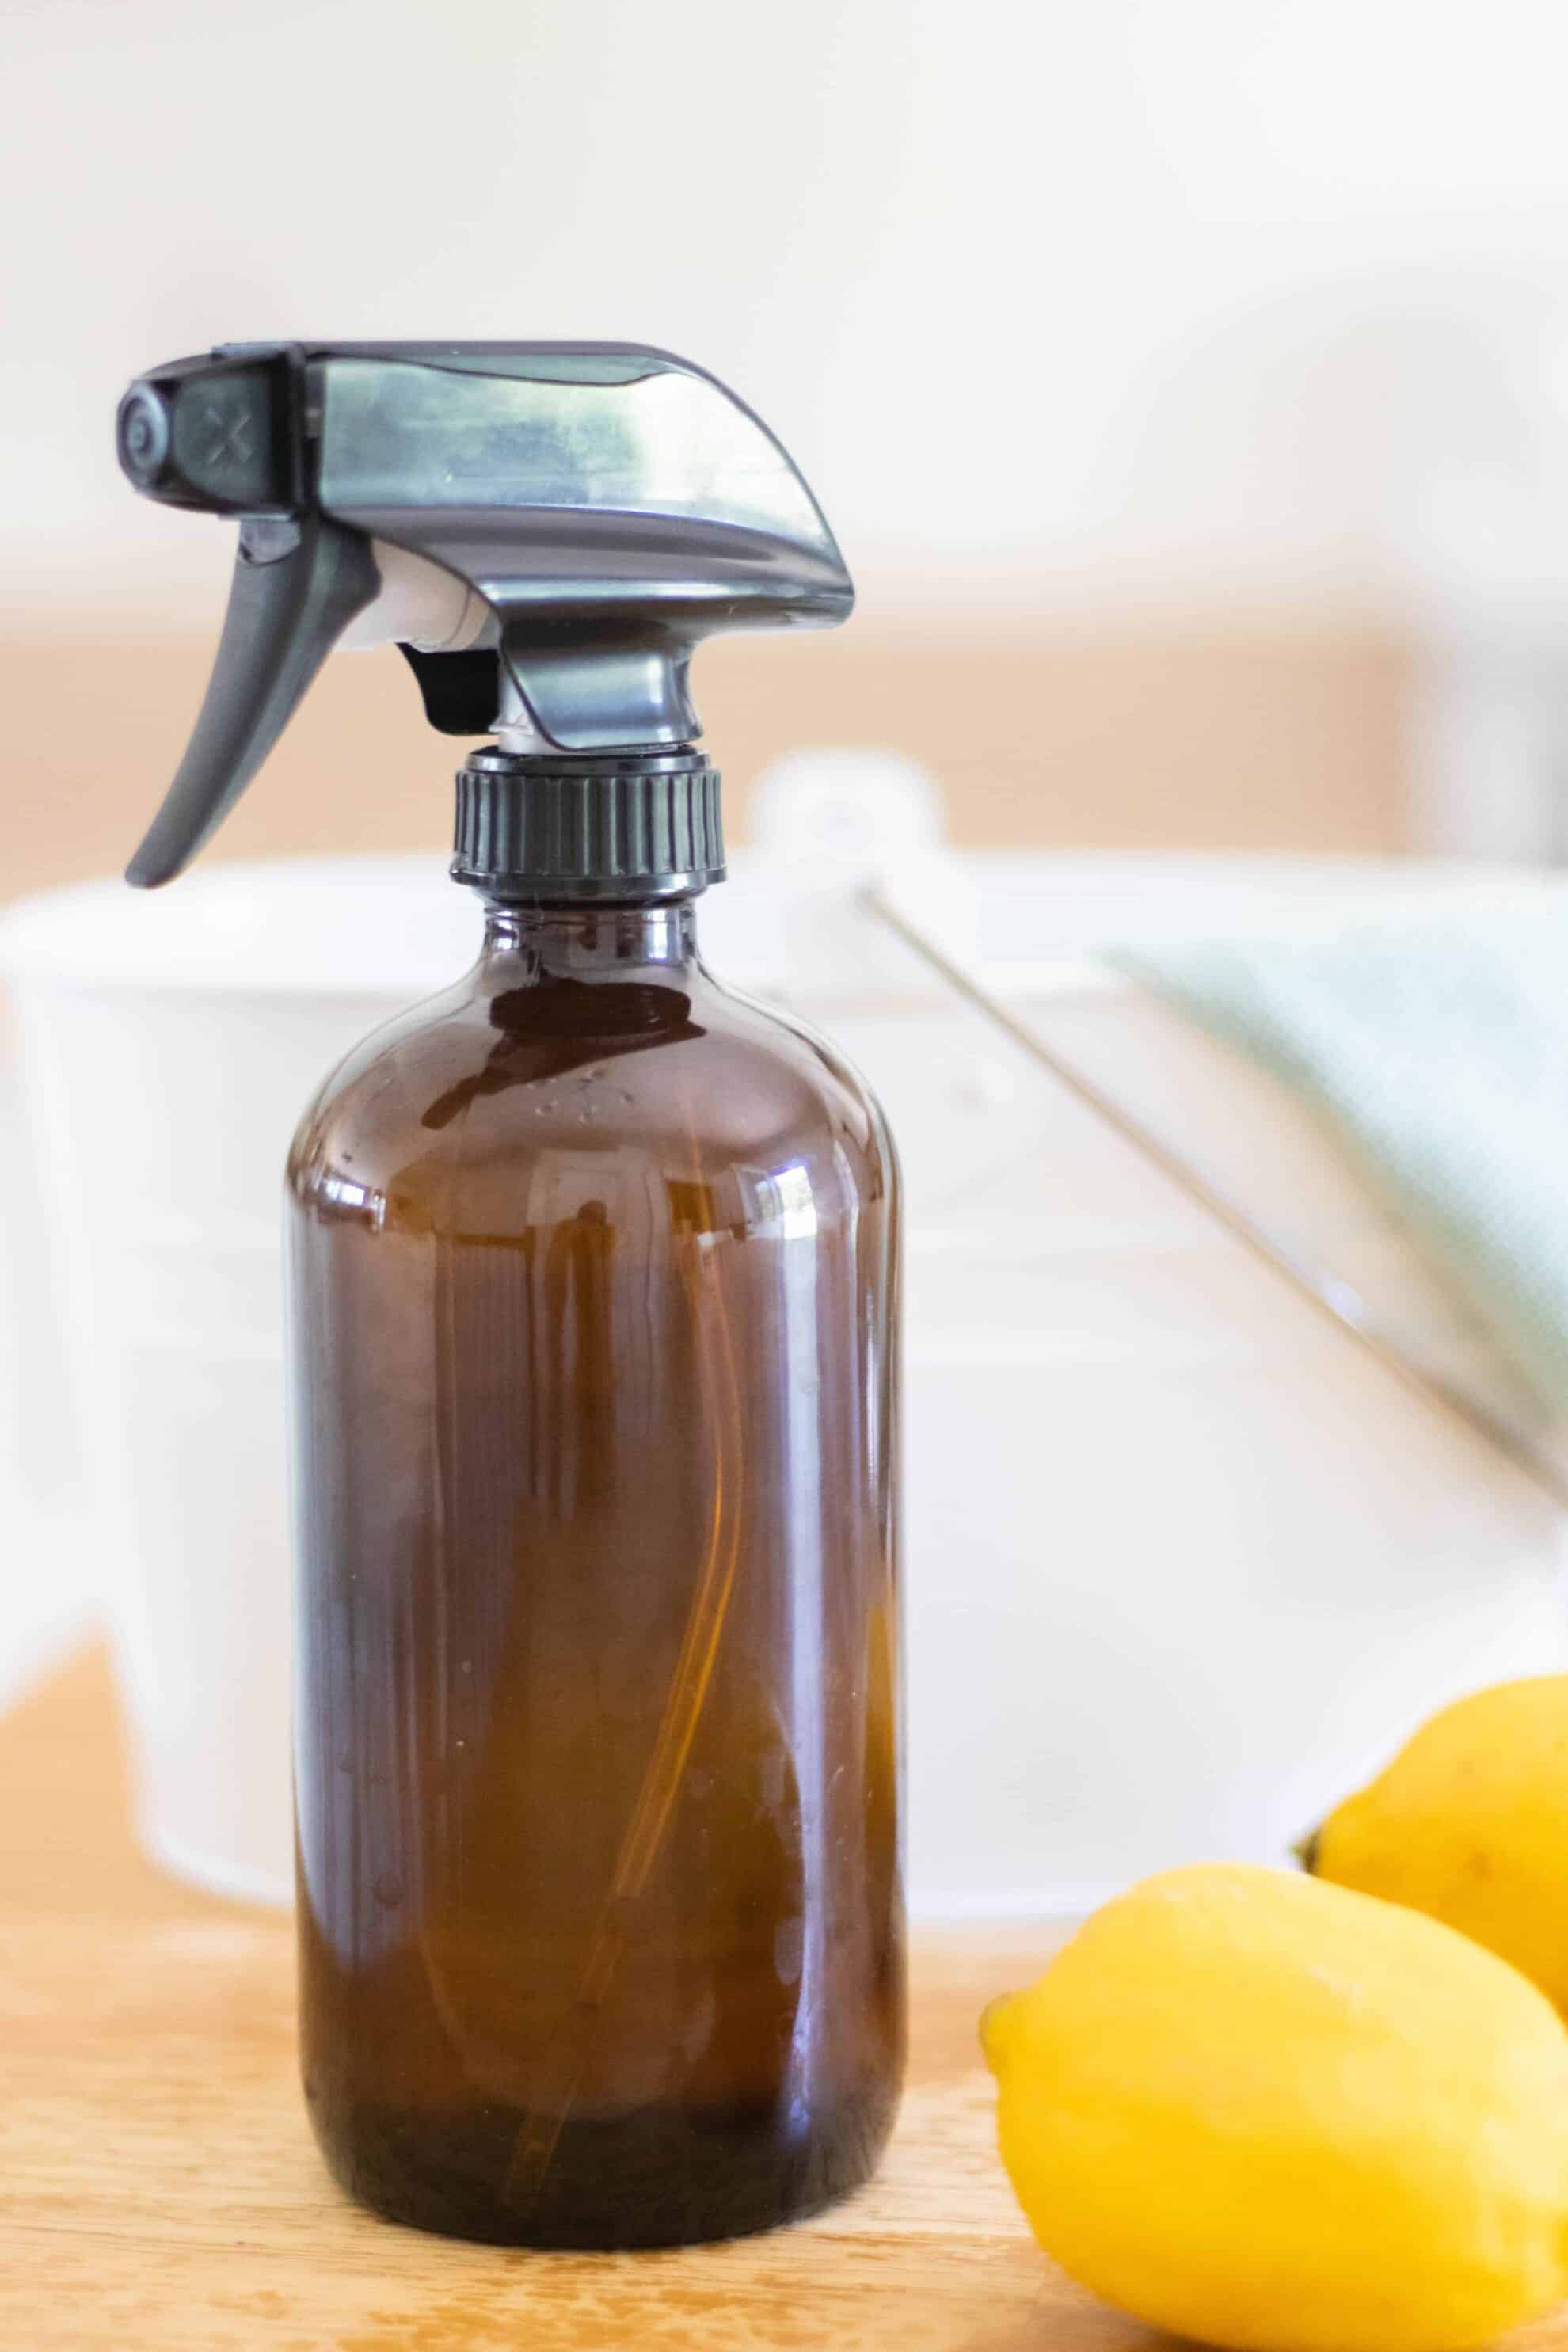 All-purpose cleaner in amber glass spray bottle on table with fresh lemons.